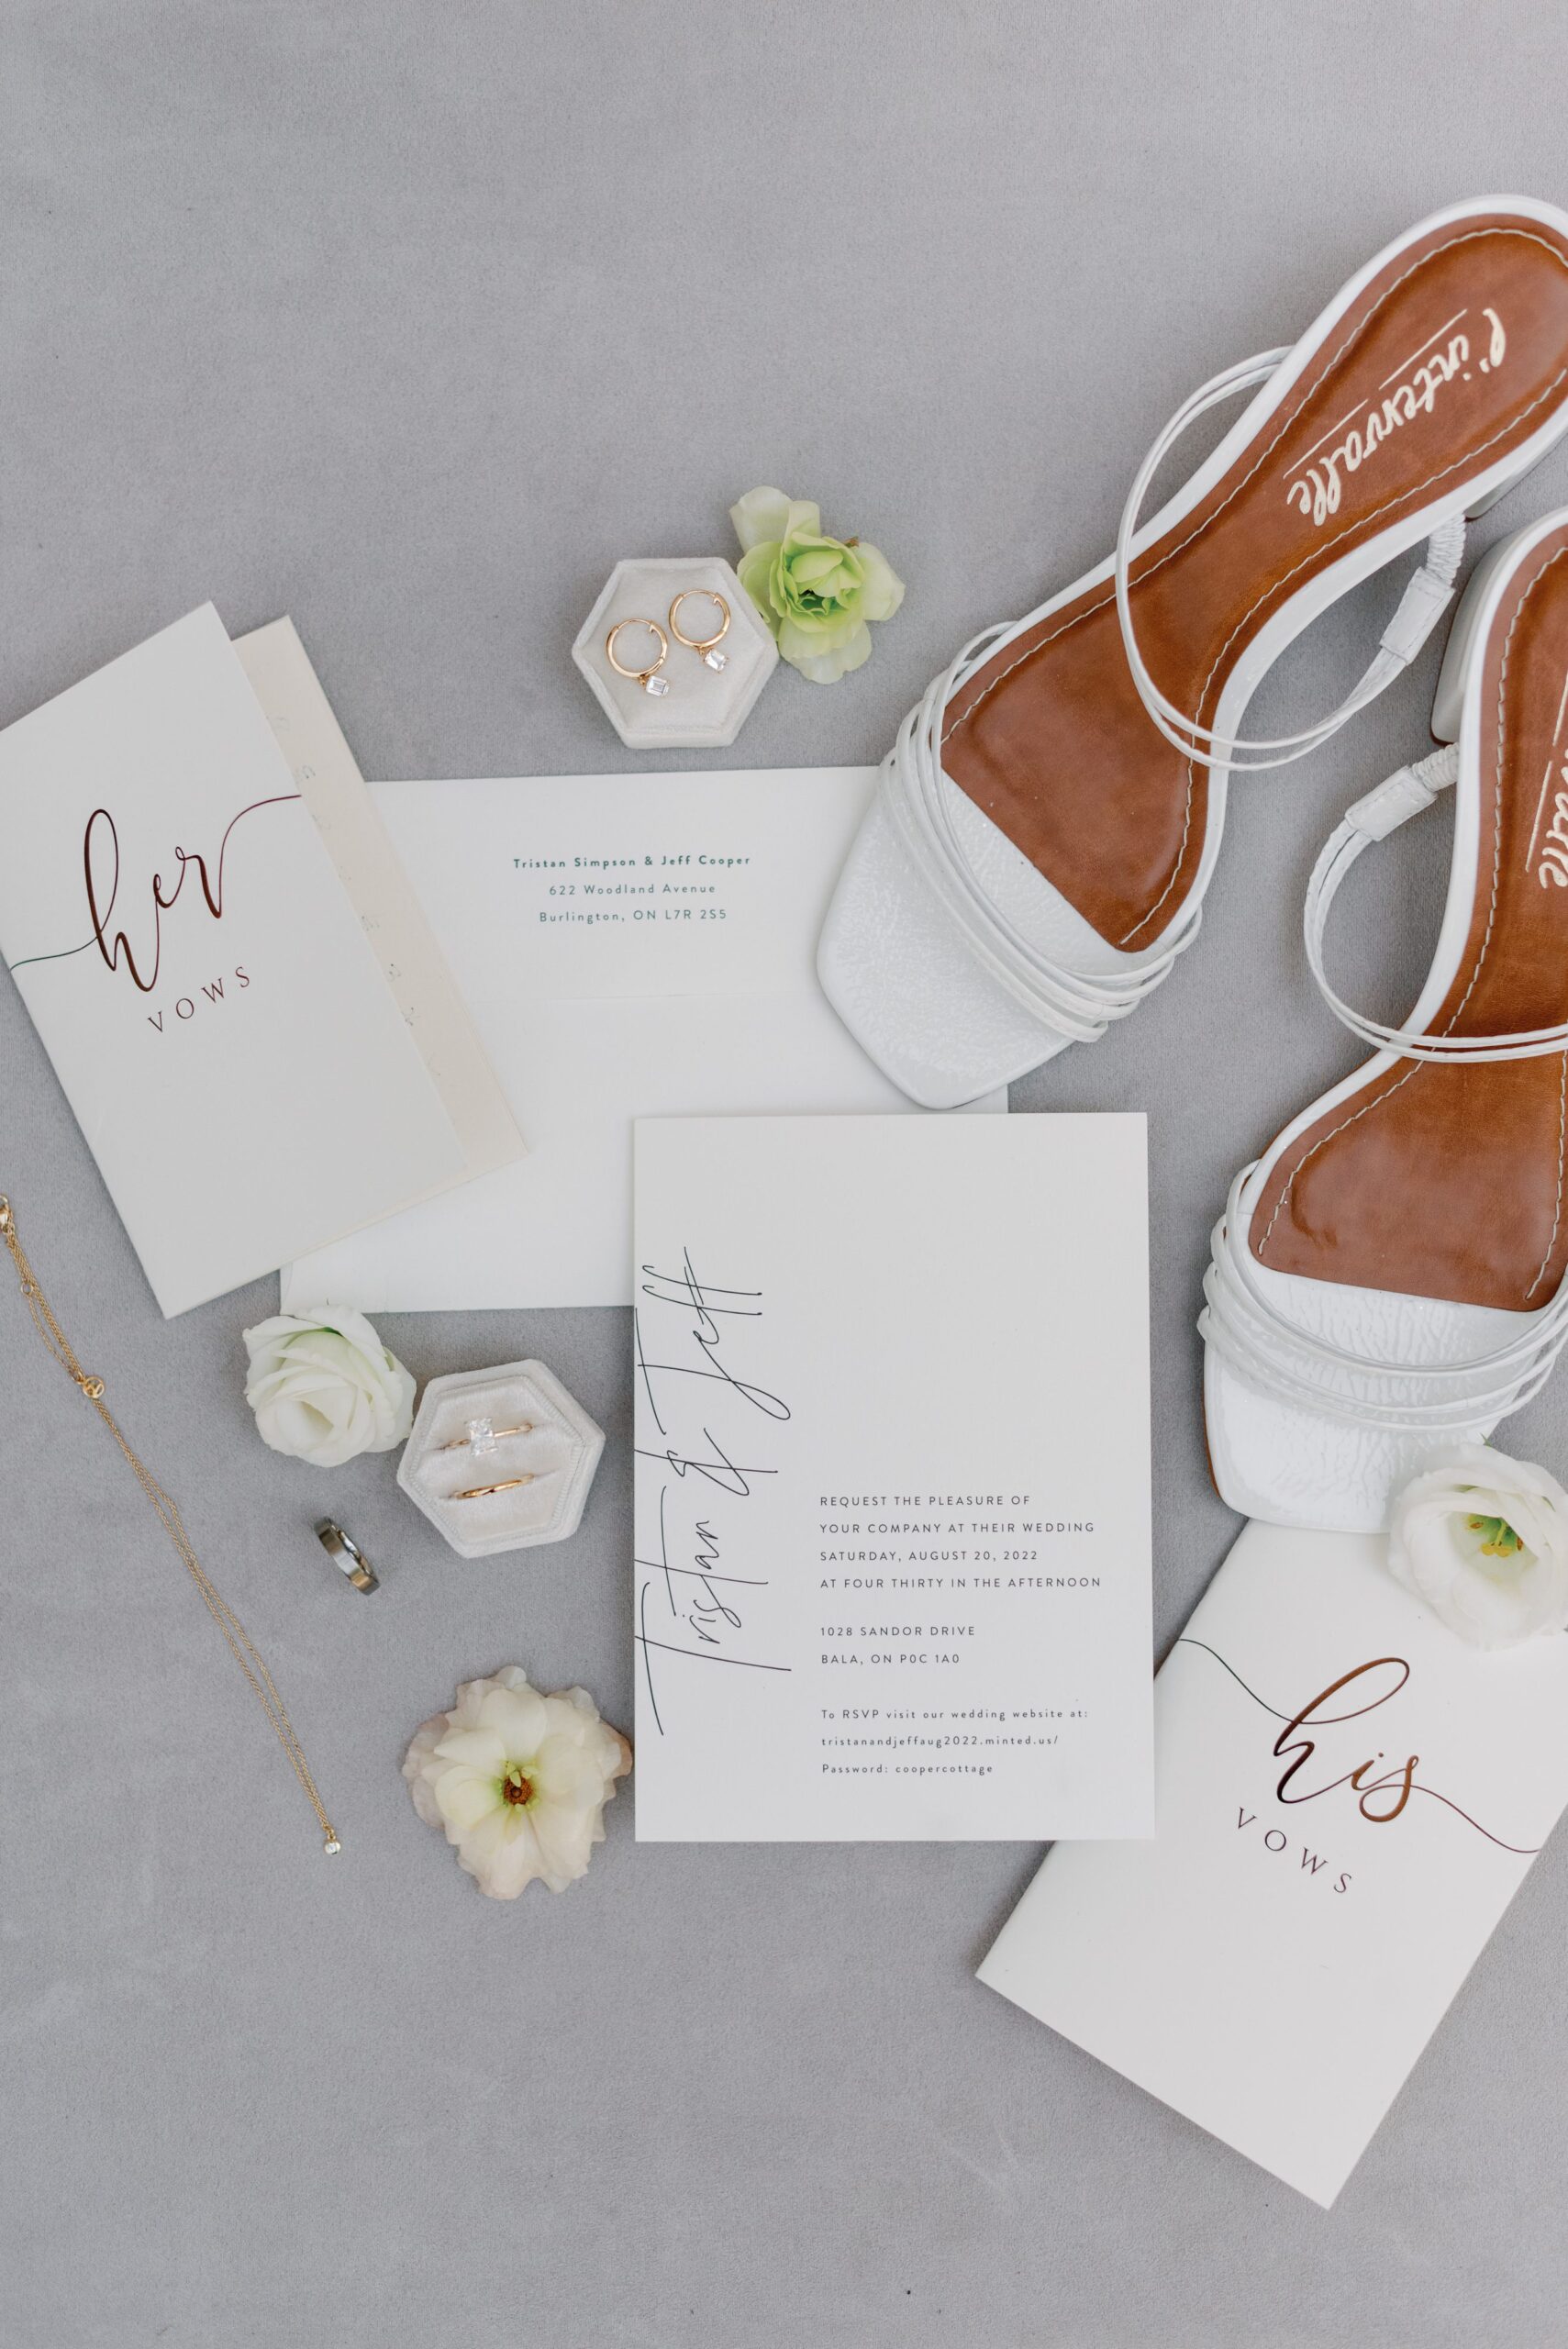 Detail of wedding invitations and vows. Wedding inspiration.